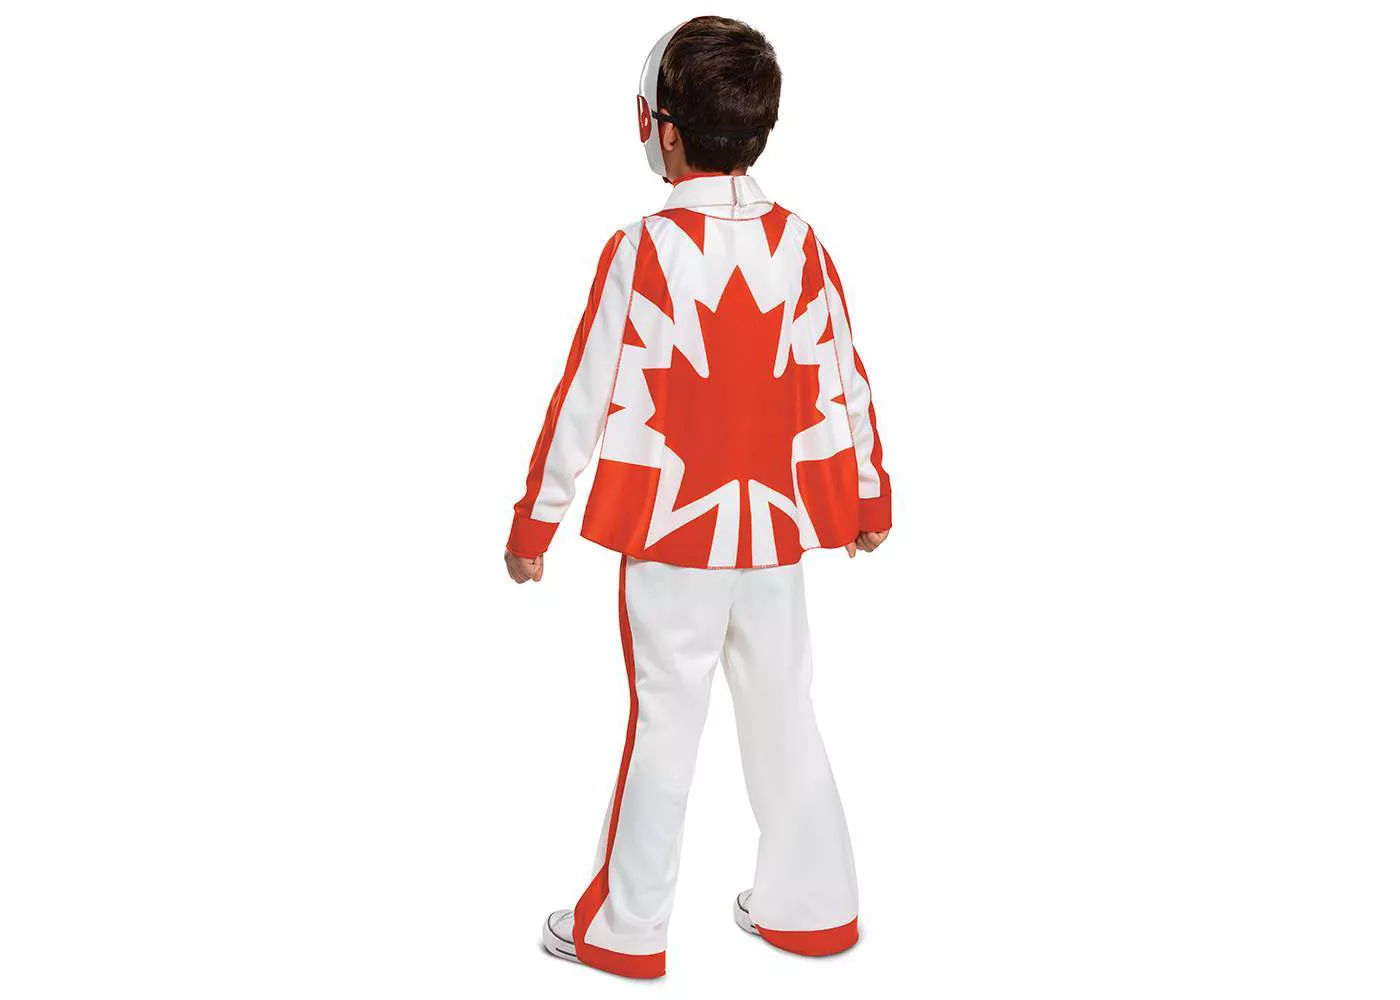 Boys' Toy Story Duke Caboom Deluxe Halloween Costume - image 2 of 2